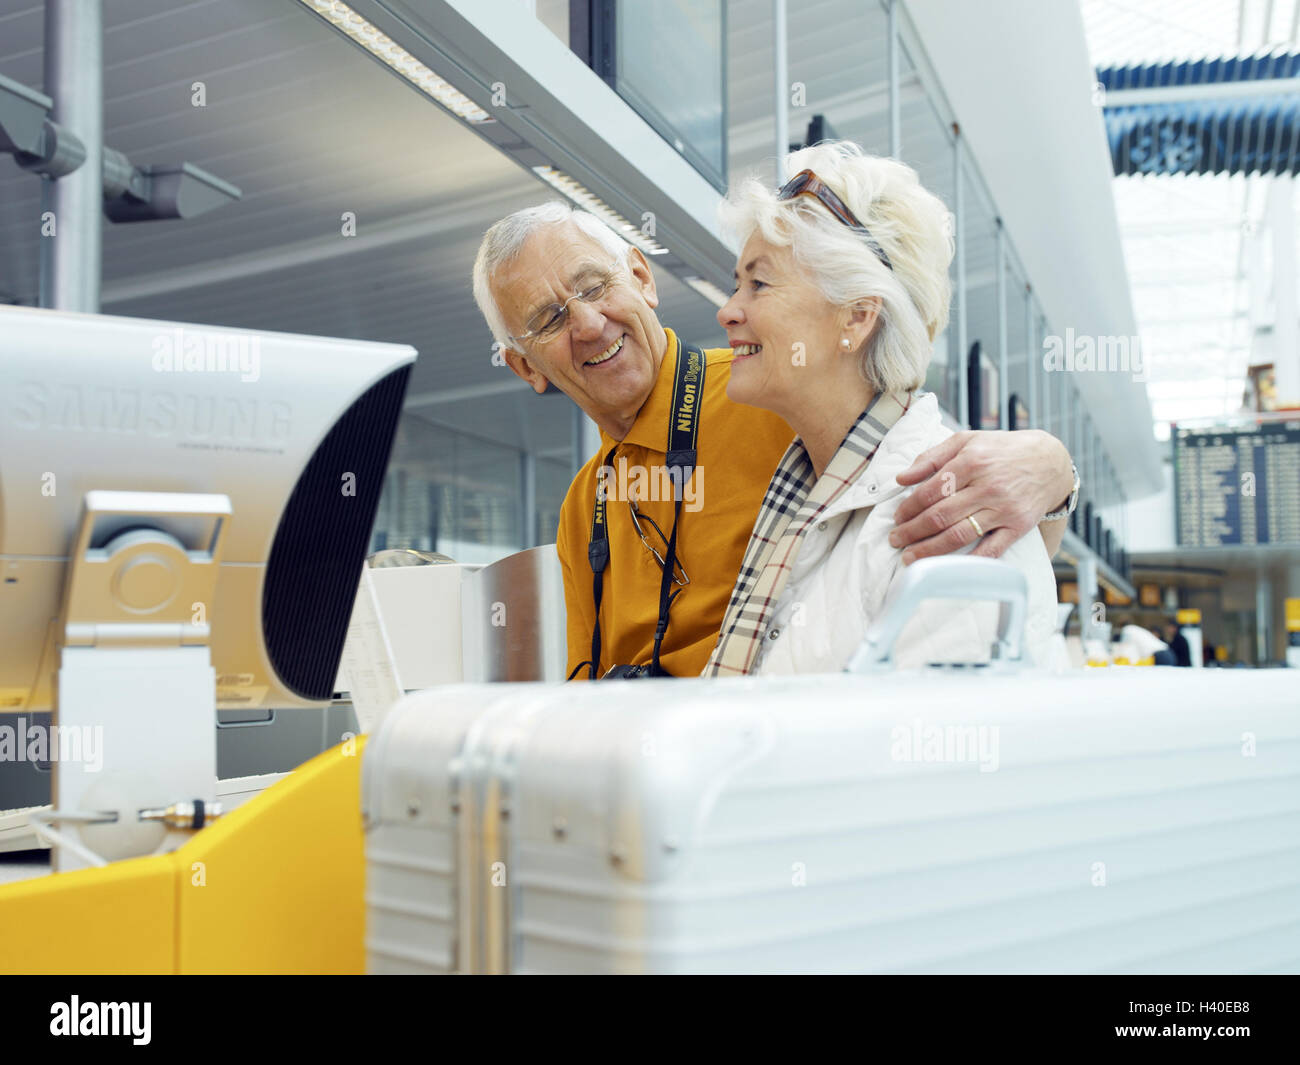 Airport, switch, Senior couple, check in, hand in, happy, check in, staff, man, ground crew, couple, senior citizens, passengers, airline passengers, luggage sale, luggage assignment, luggage, luggage, suitcase, pass, to travel, journey by air, foreign tr Stock Photo